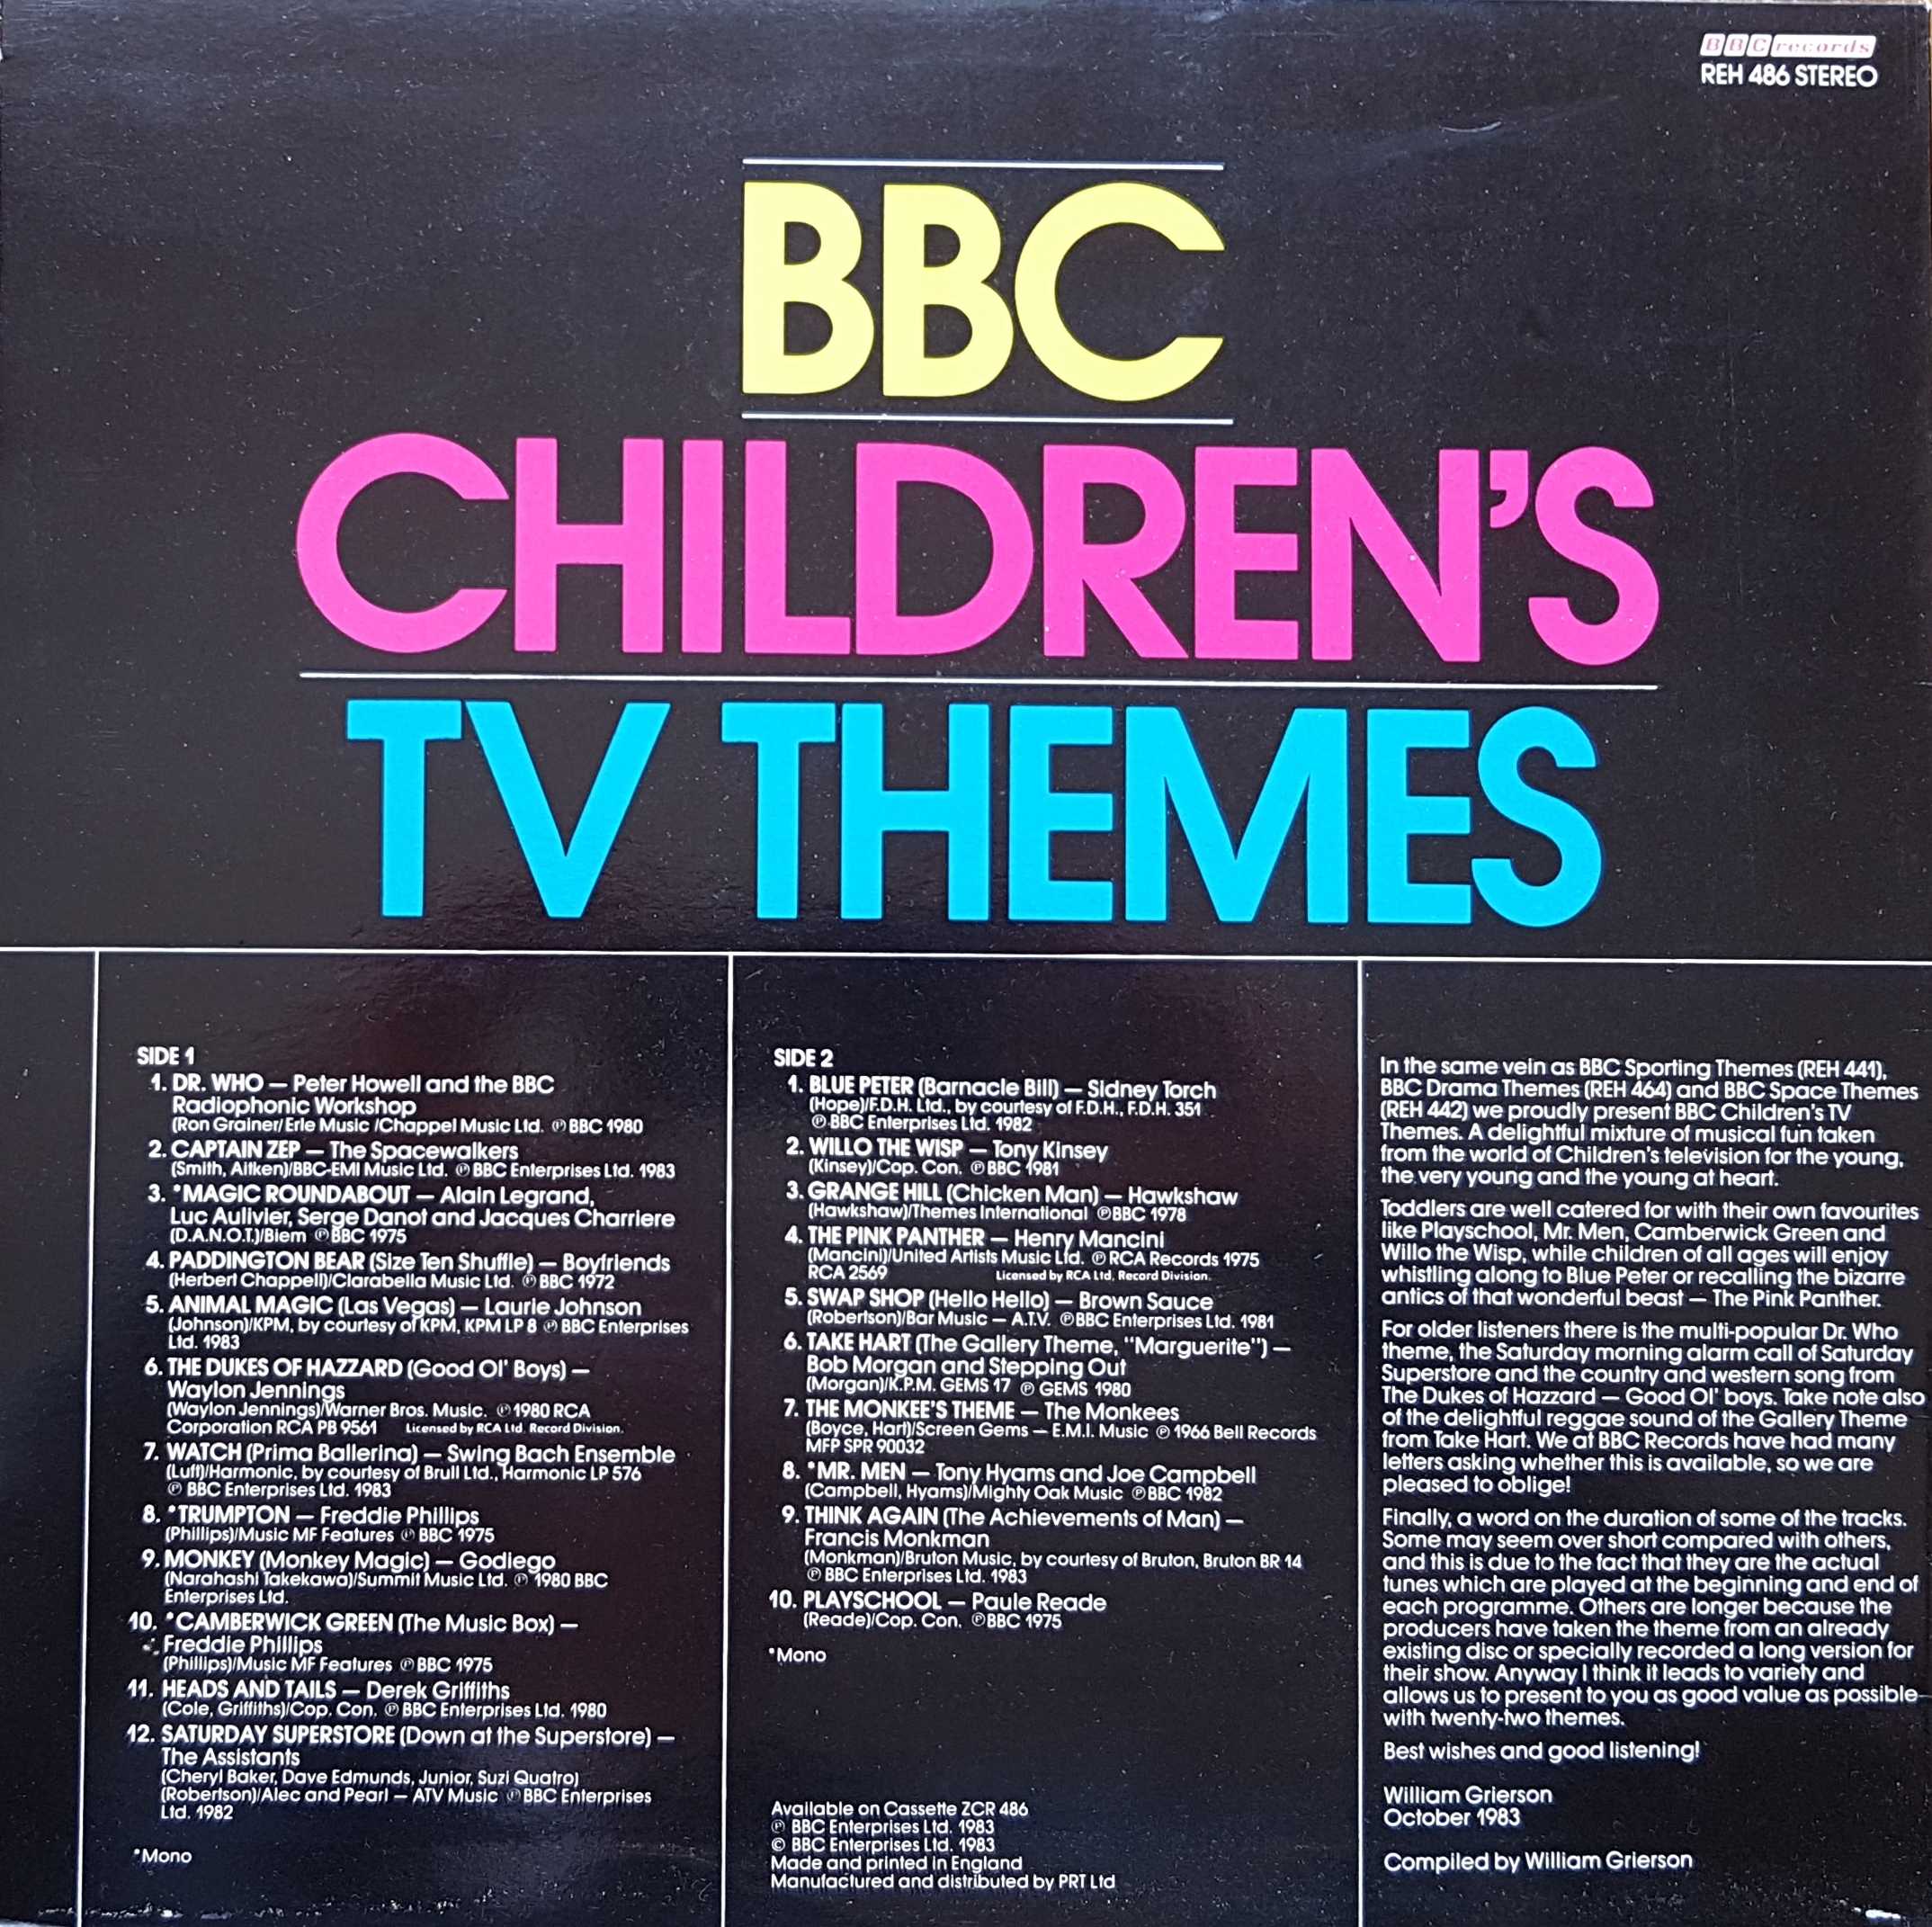 Picture of REH 486 BBC children's TV themes by artist Various from the BBC records and Tapes library